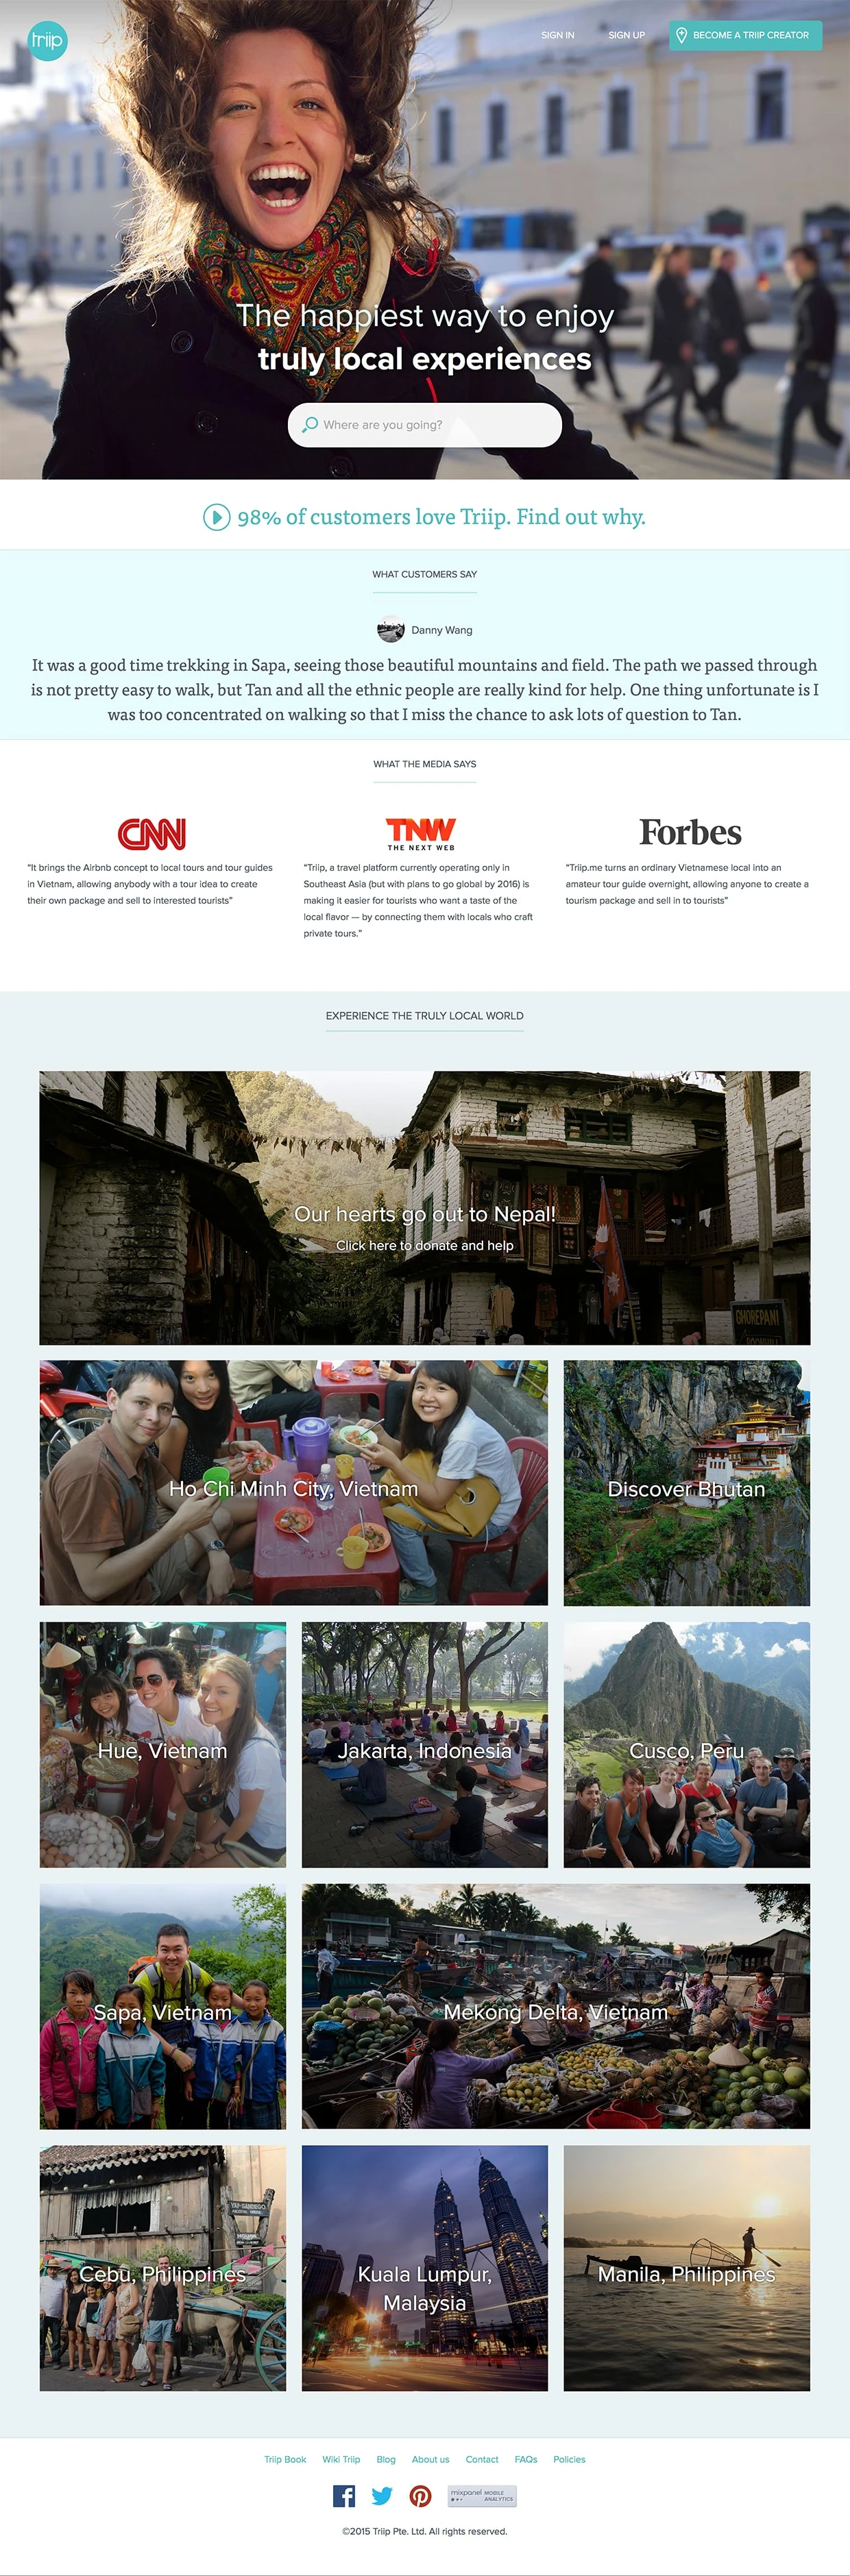 Triip Landing Page Example: Triip is the travel platform that enables travelers to enjoy the best private tours passionately crafted by handpicked local tour guides